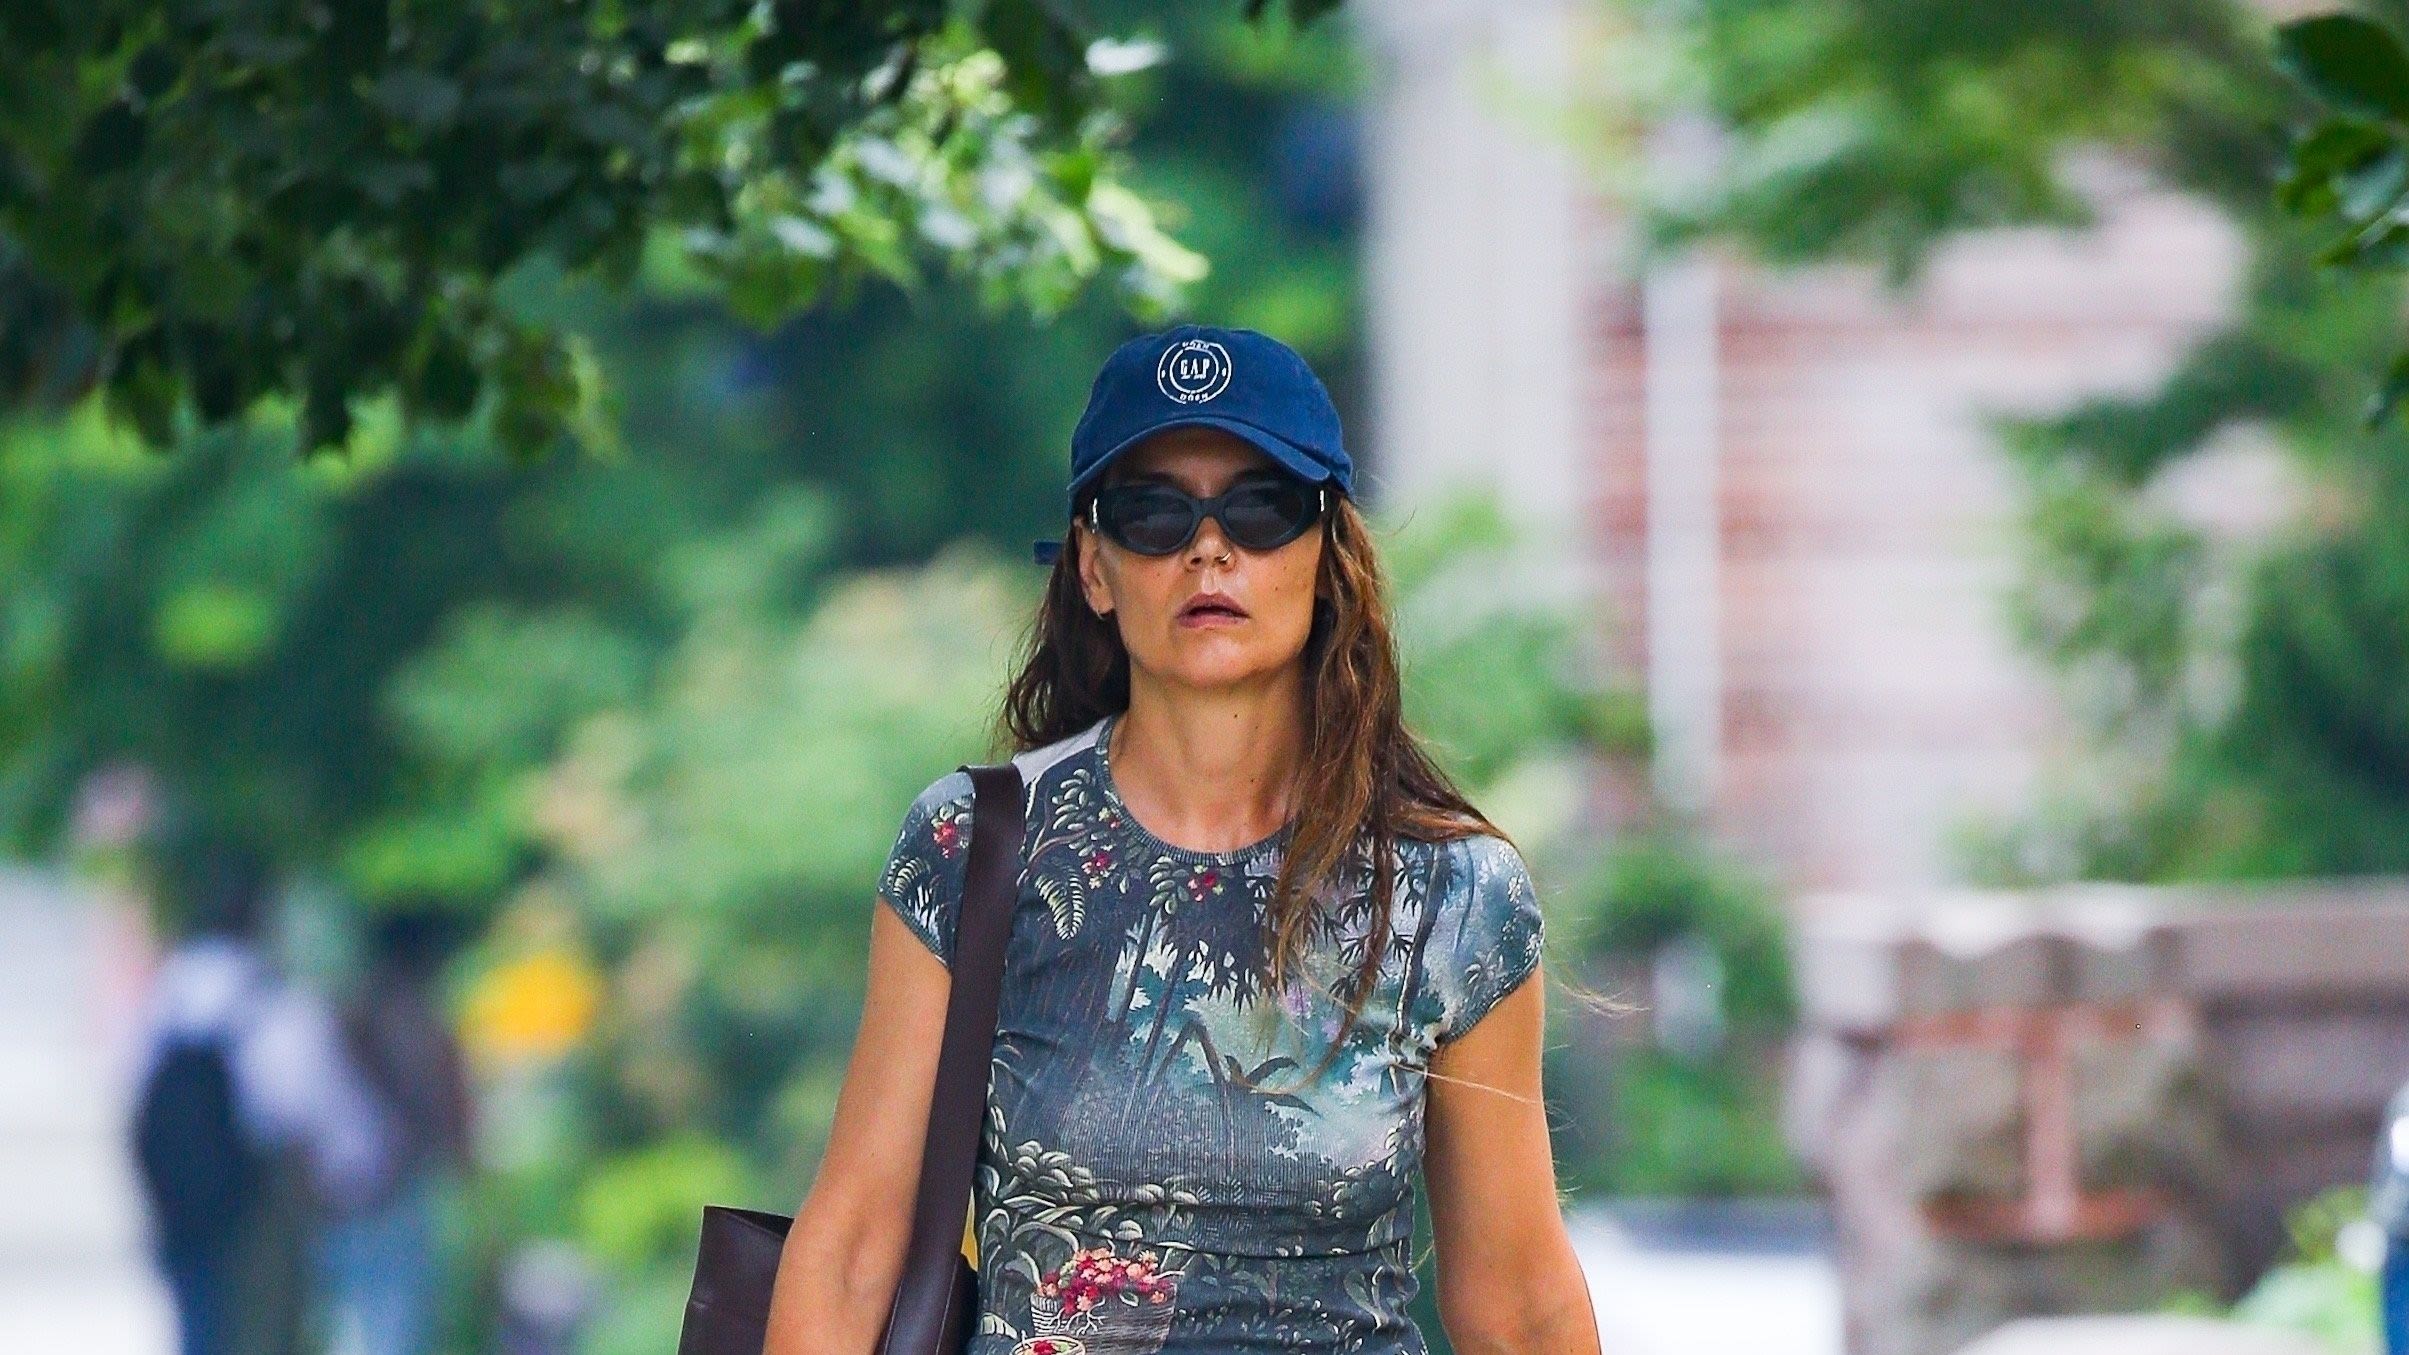 Katie Holmes’s Latest Summer Look Is All About Layering Bright Colors